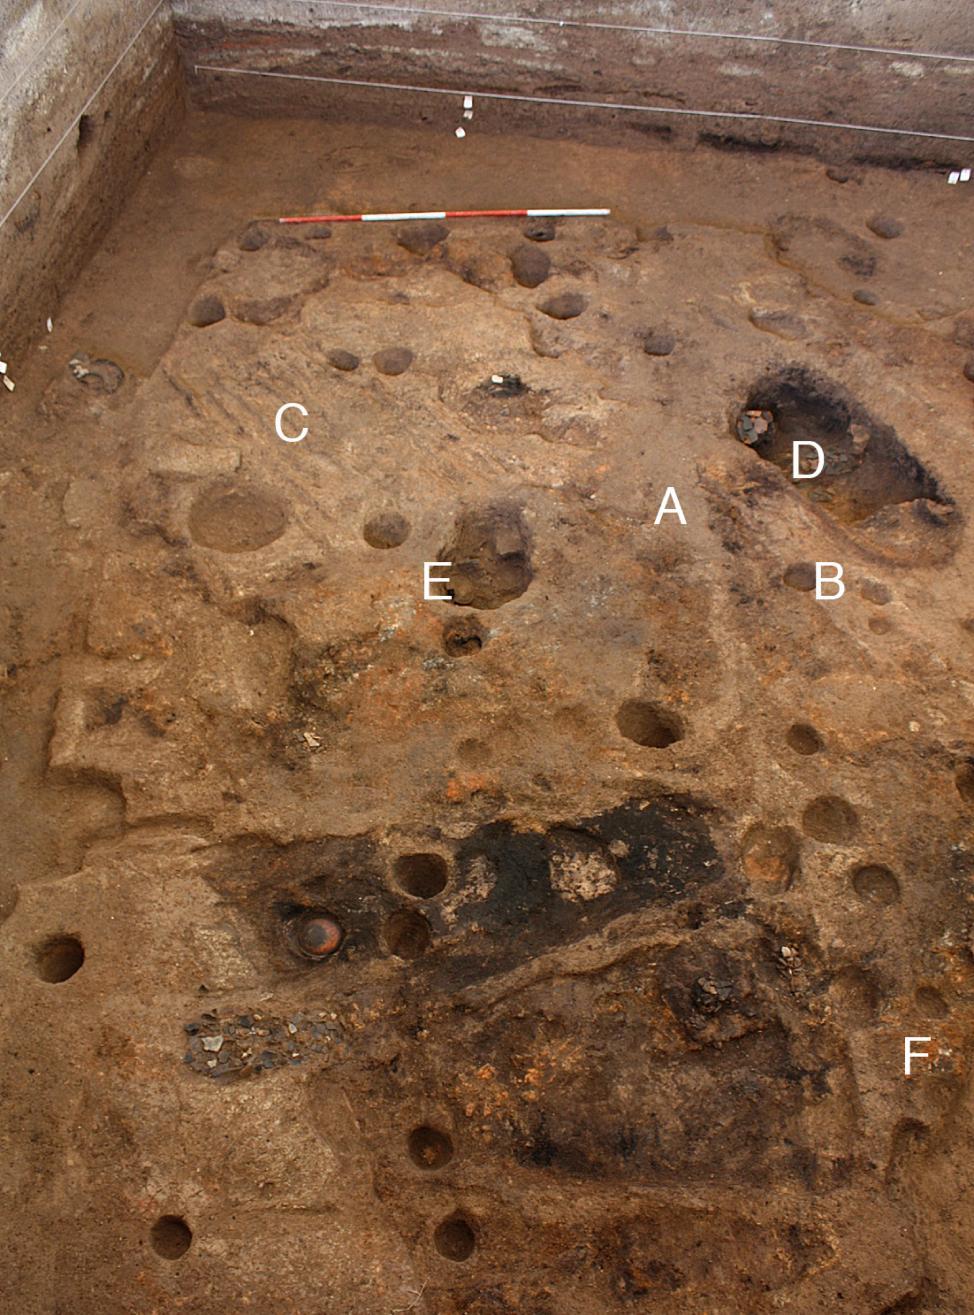 HIGHAM ET AL.: THE EXCAVATION OF NON BAN JAK, NORTHEAST THAILAND - A REPORT ON THE FIRST THREE SEASONS Figure 6: The surface of layer 5., western half of the square, showing two suerimosed buildings.